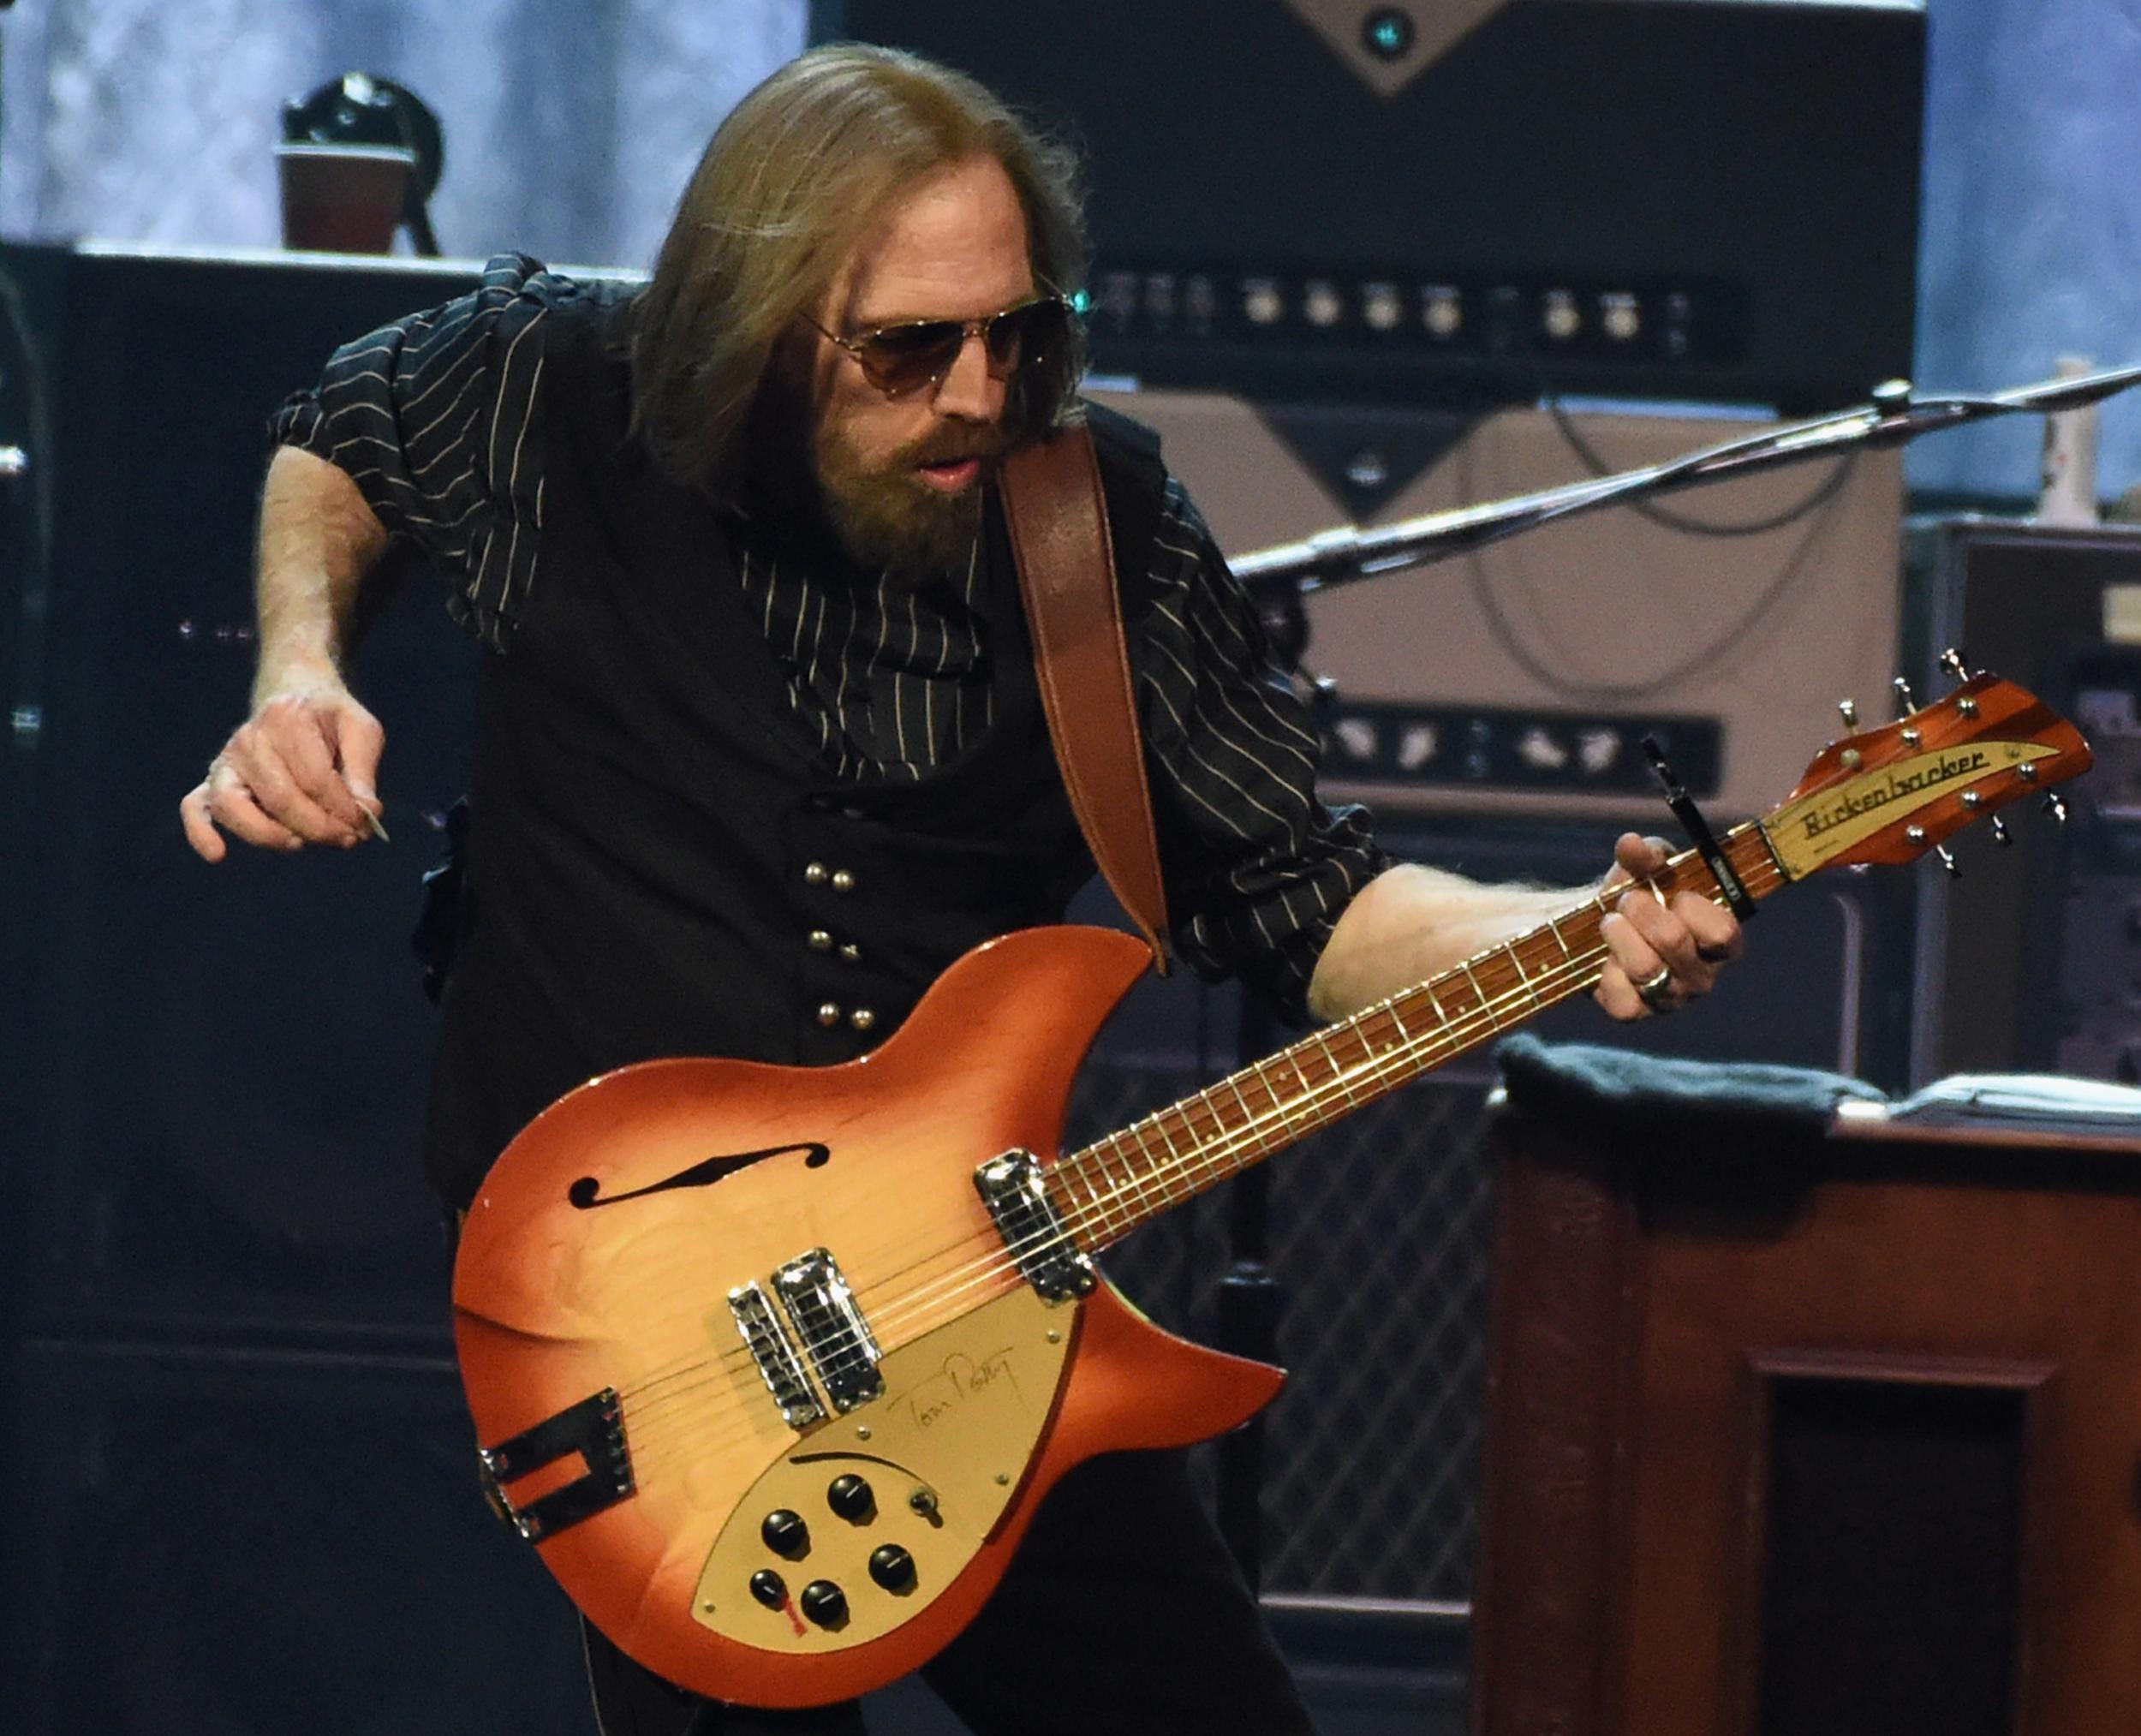 Tom Petty headlined the Super Bowl halftime show in 2008